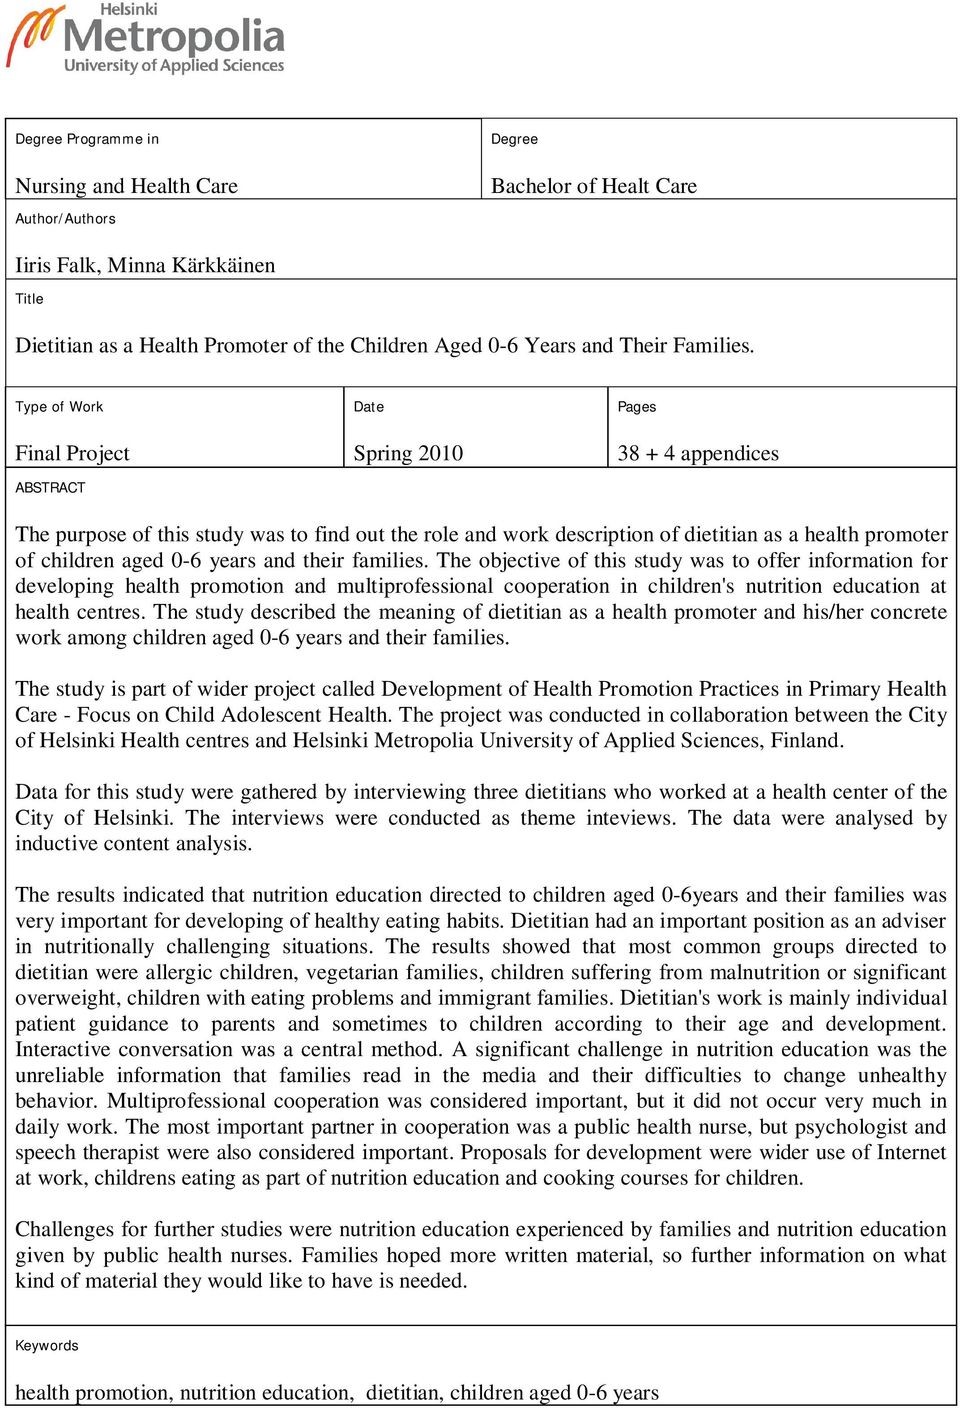 Type of Work Final Project ABSTRACT Date Spring 2010 Pages 38 + 4 appendices The purpose of this study was to find out the role and work description of dietitian as a health promoter of children aged